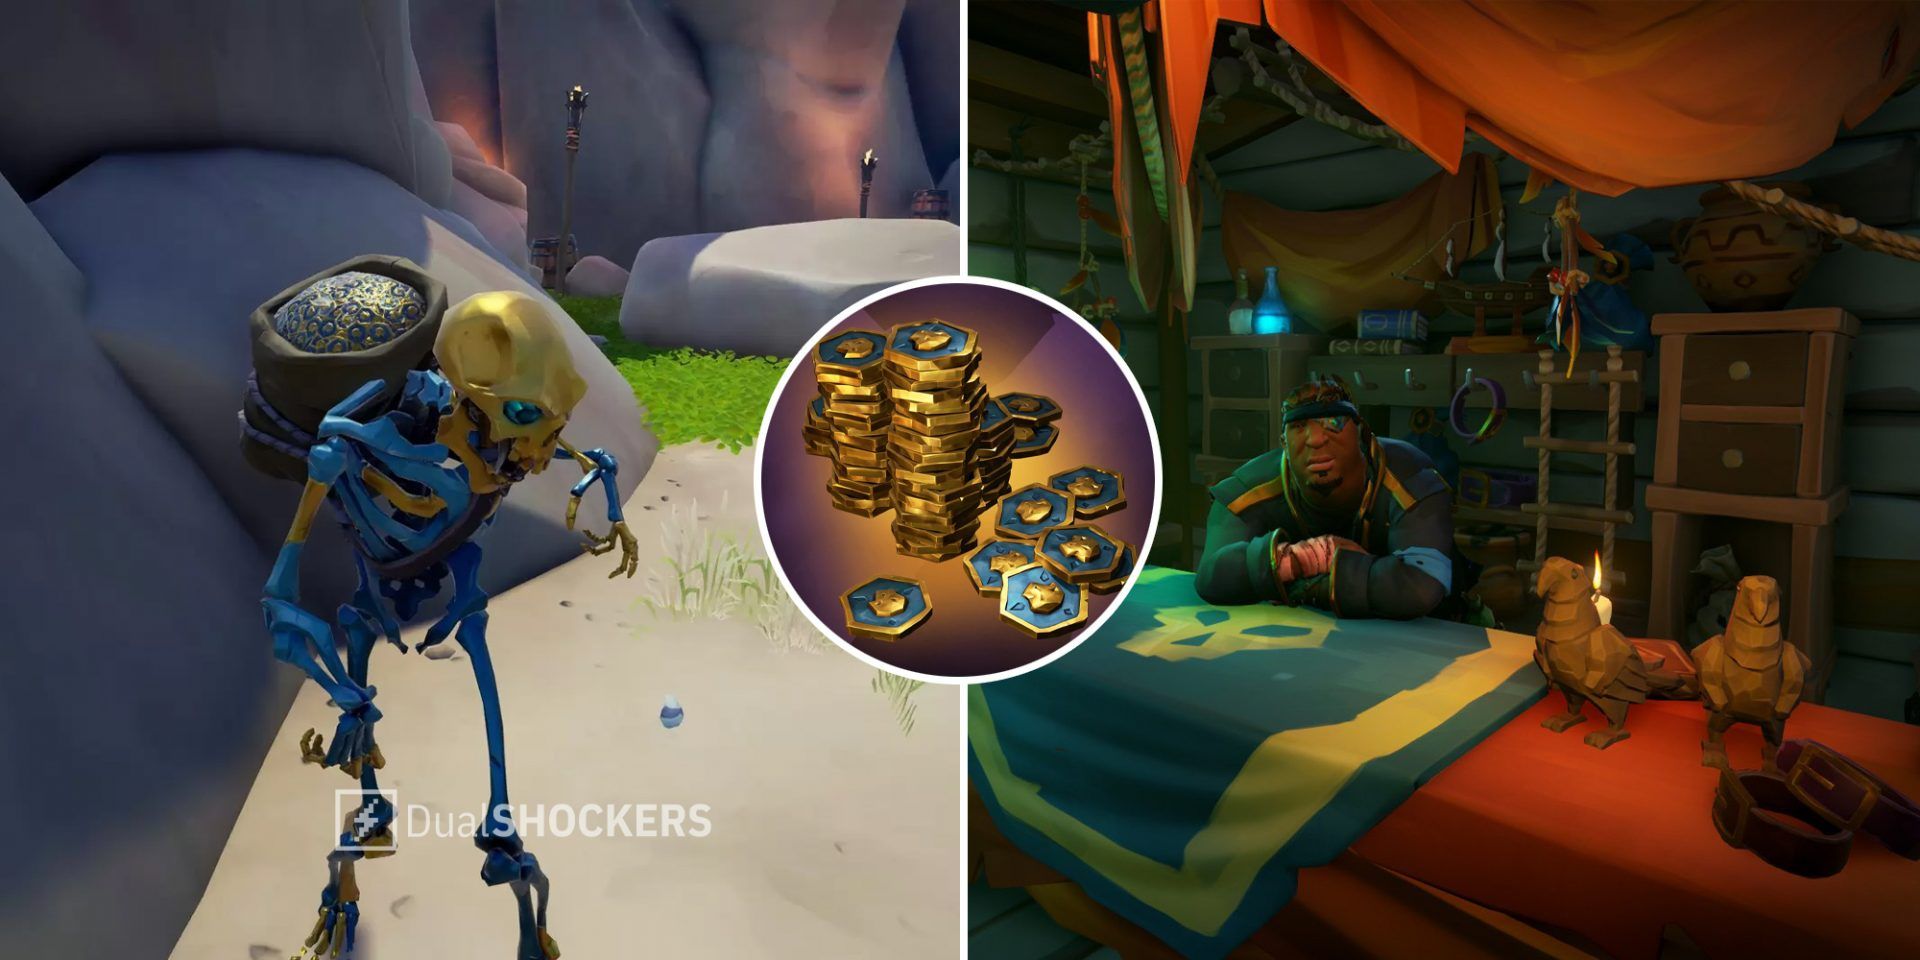 Sea of Thieves Ancient Skeleton on left, ancient coins in middle, Pirate Emporium on right